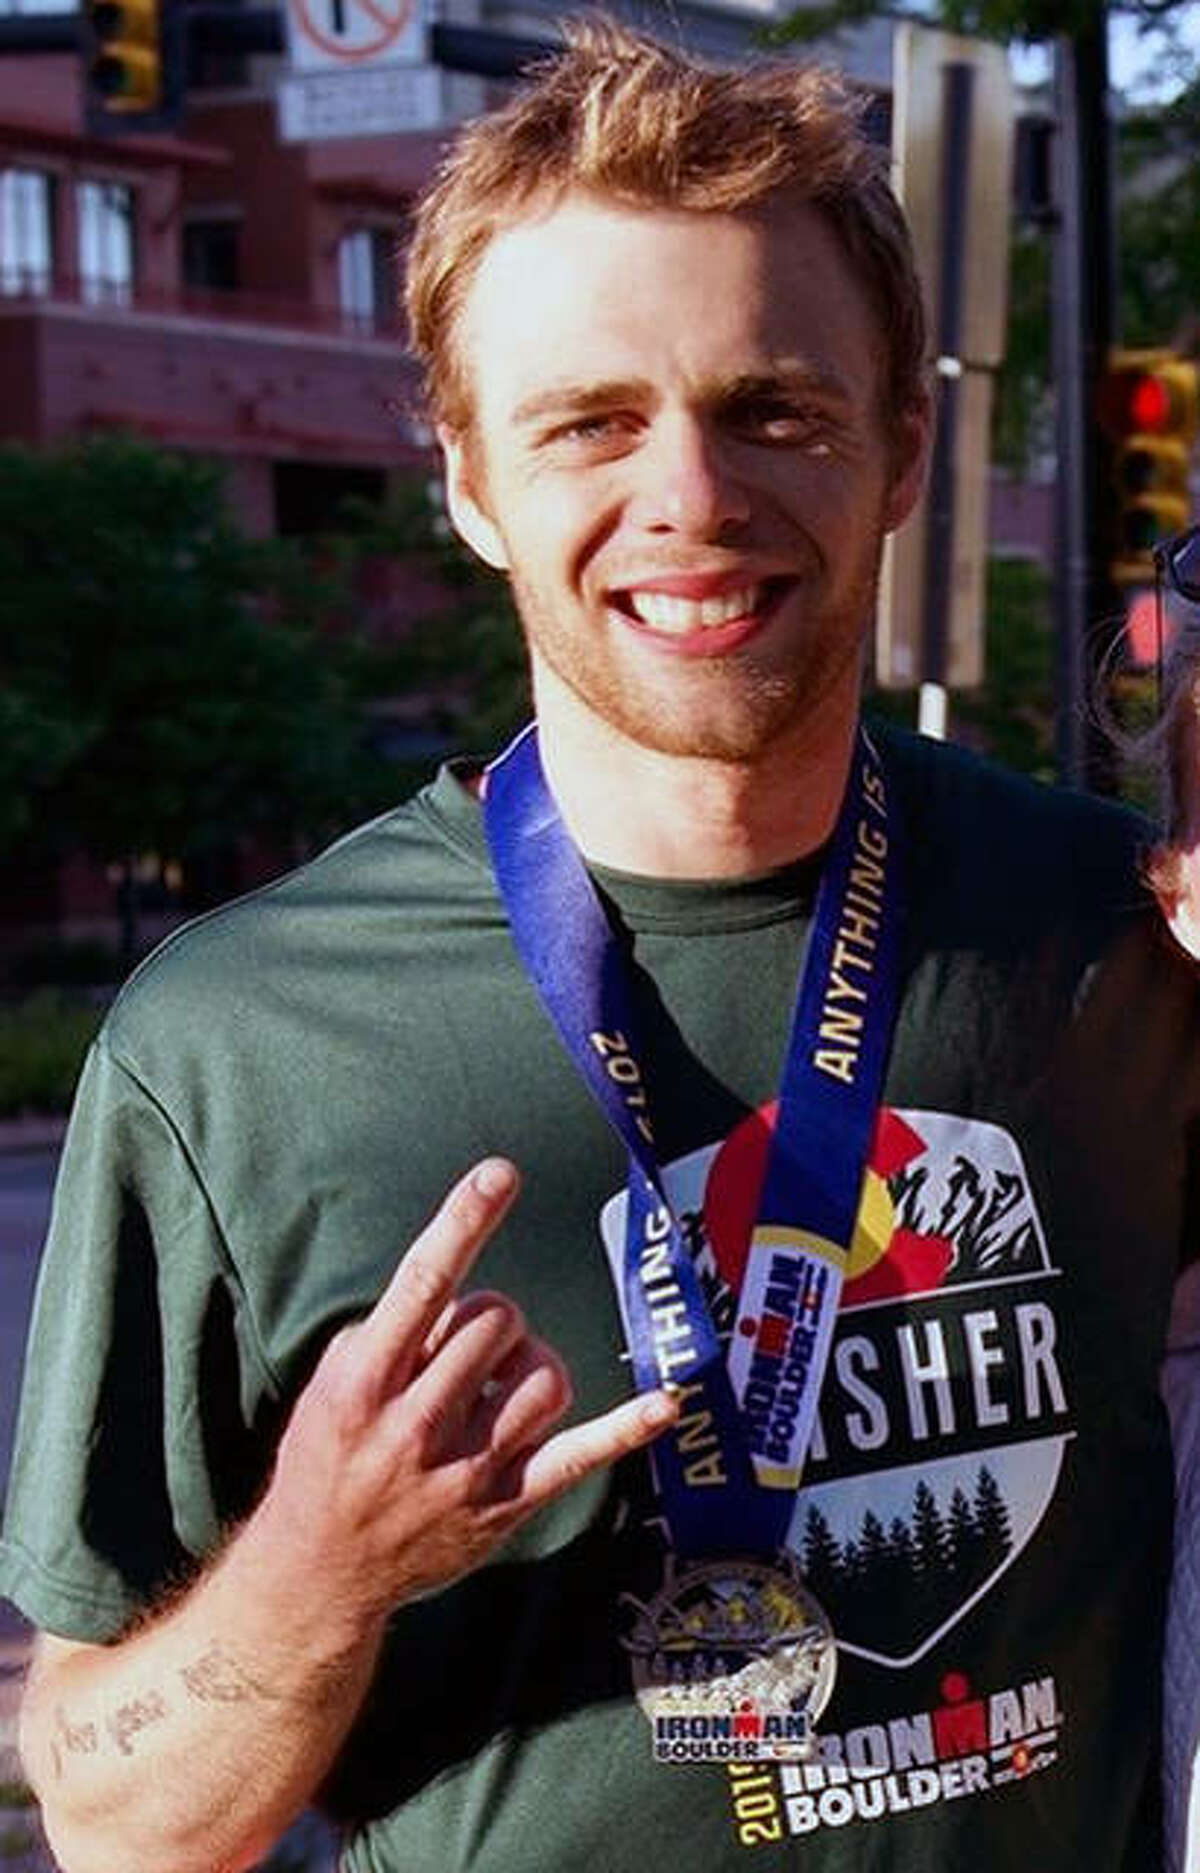 Former Principia College swimmer and baseball player Garrett Barner, a 2019 Principia College grad, recently completed the Ironman Boulder Triathlon in Boulder Colo. Above, he celebrates after his seventh-place finish in the 18-24 age group.